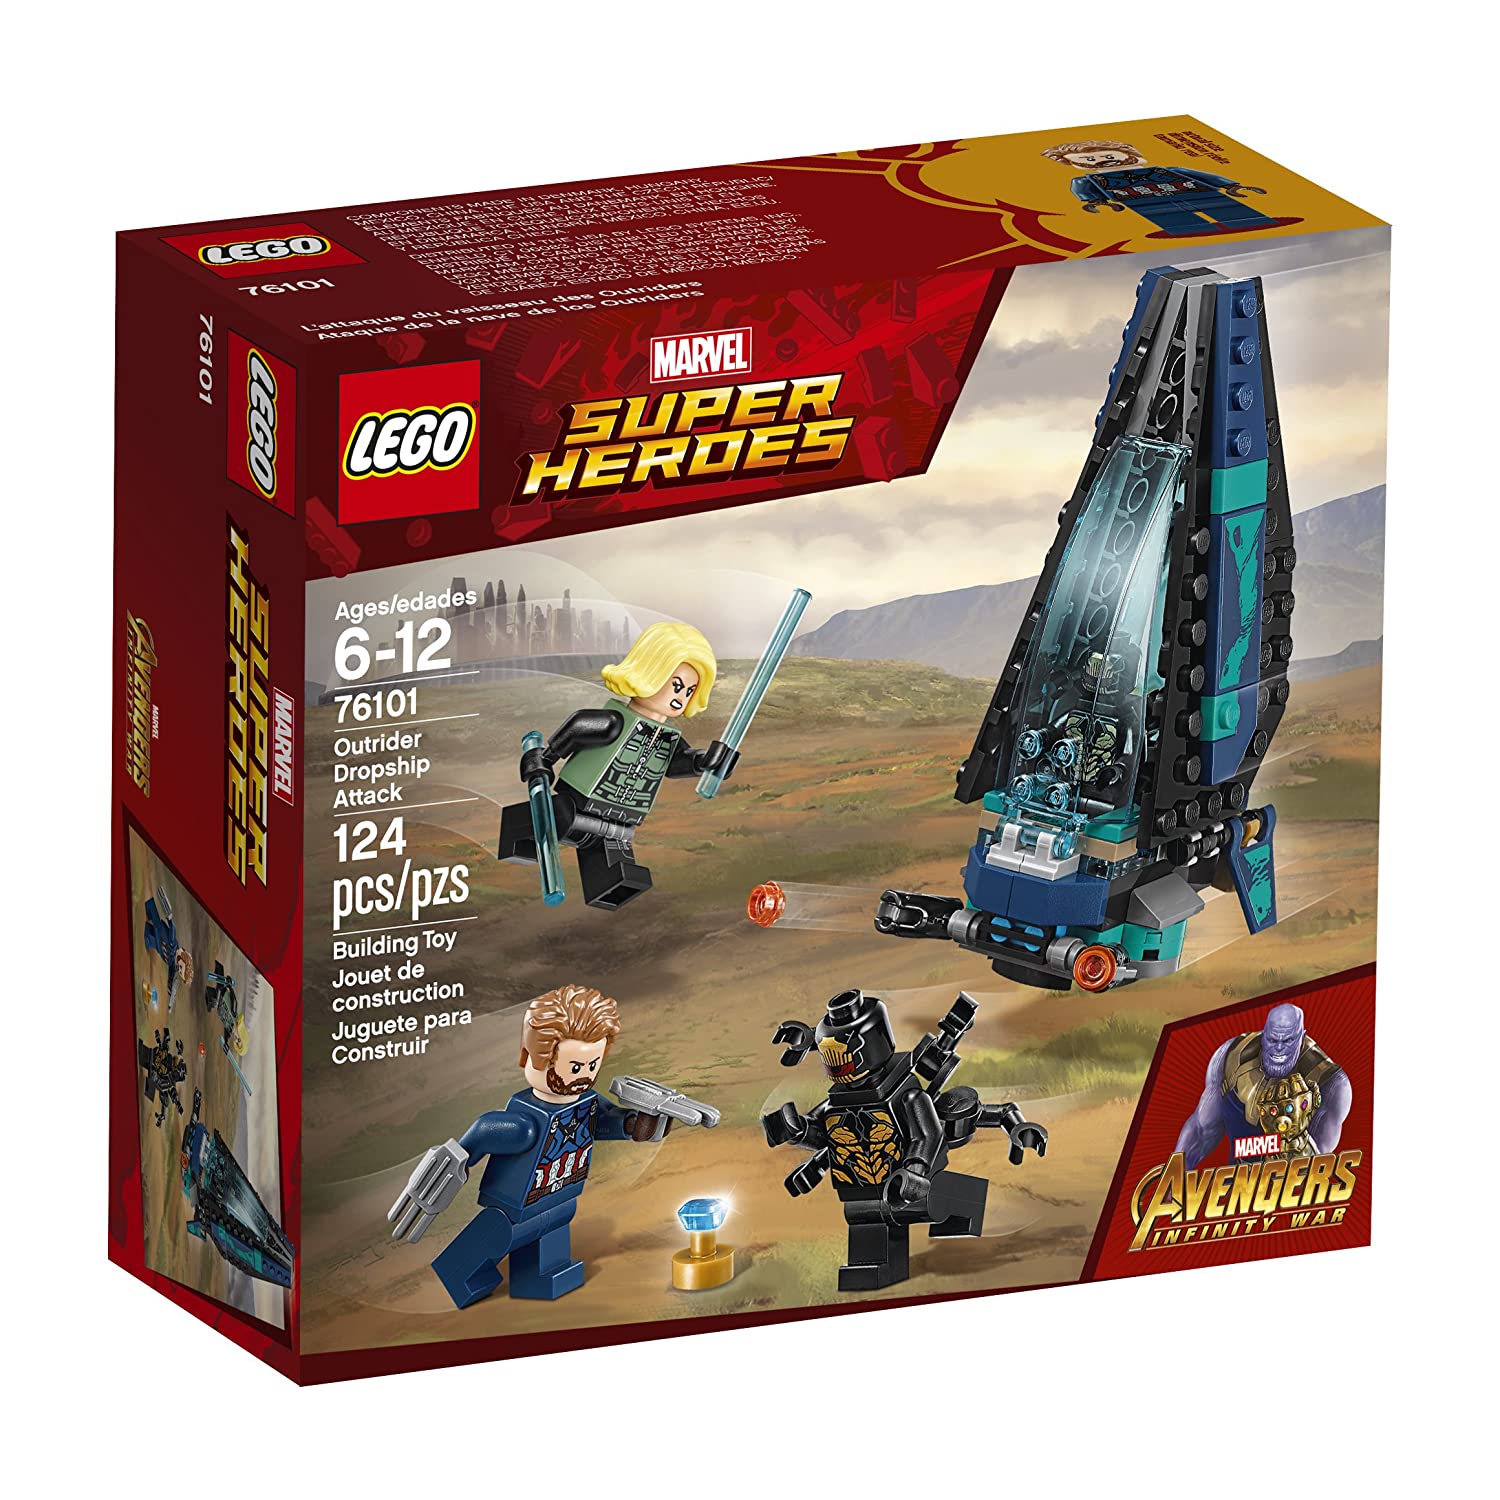 Top 9 Best LEGO Avengers Infinity War Sets Reviews in 2023 6